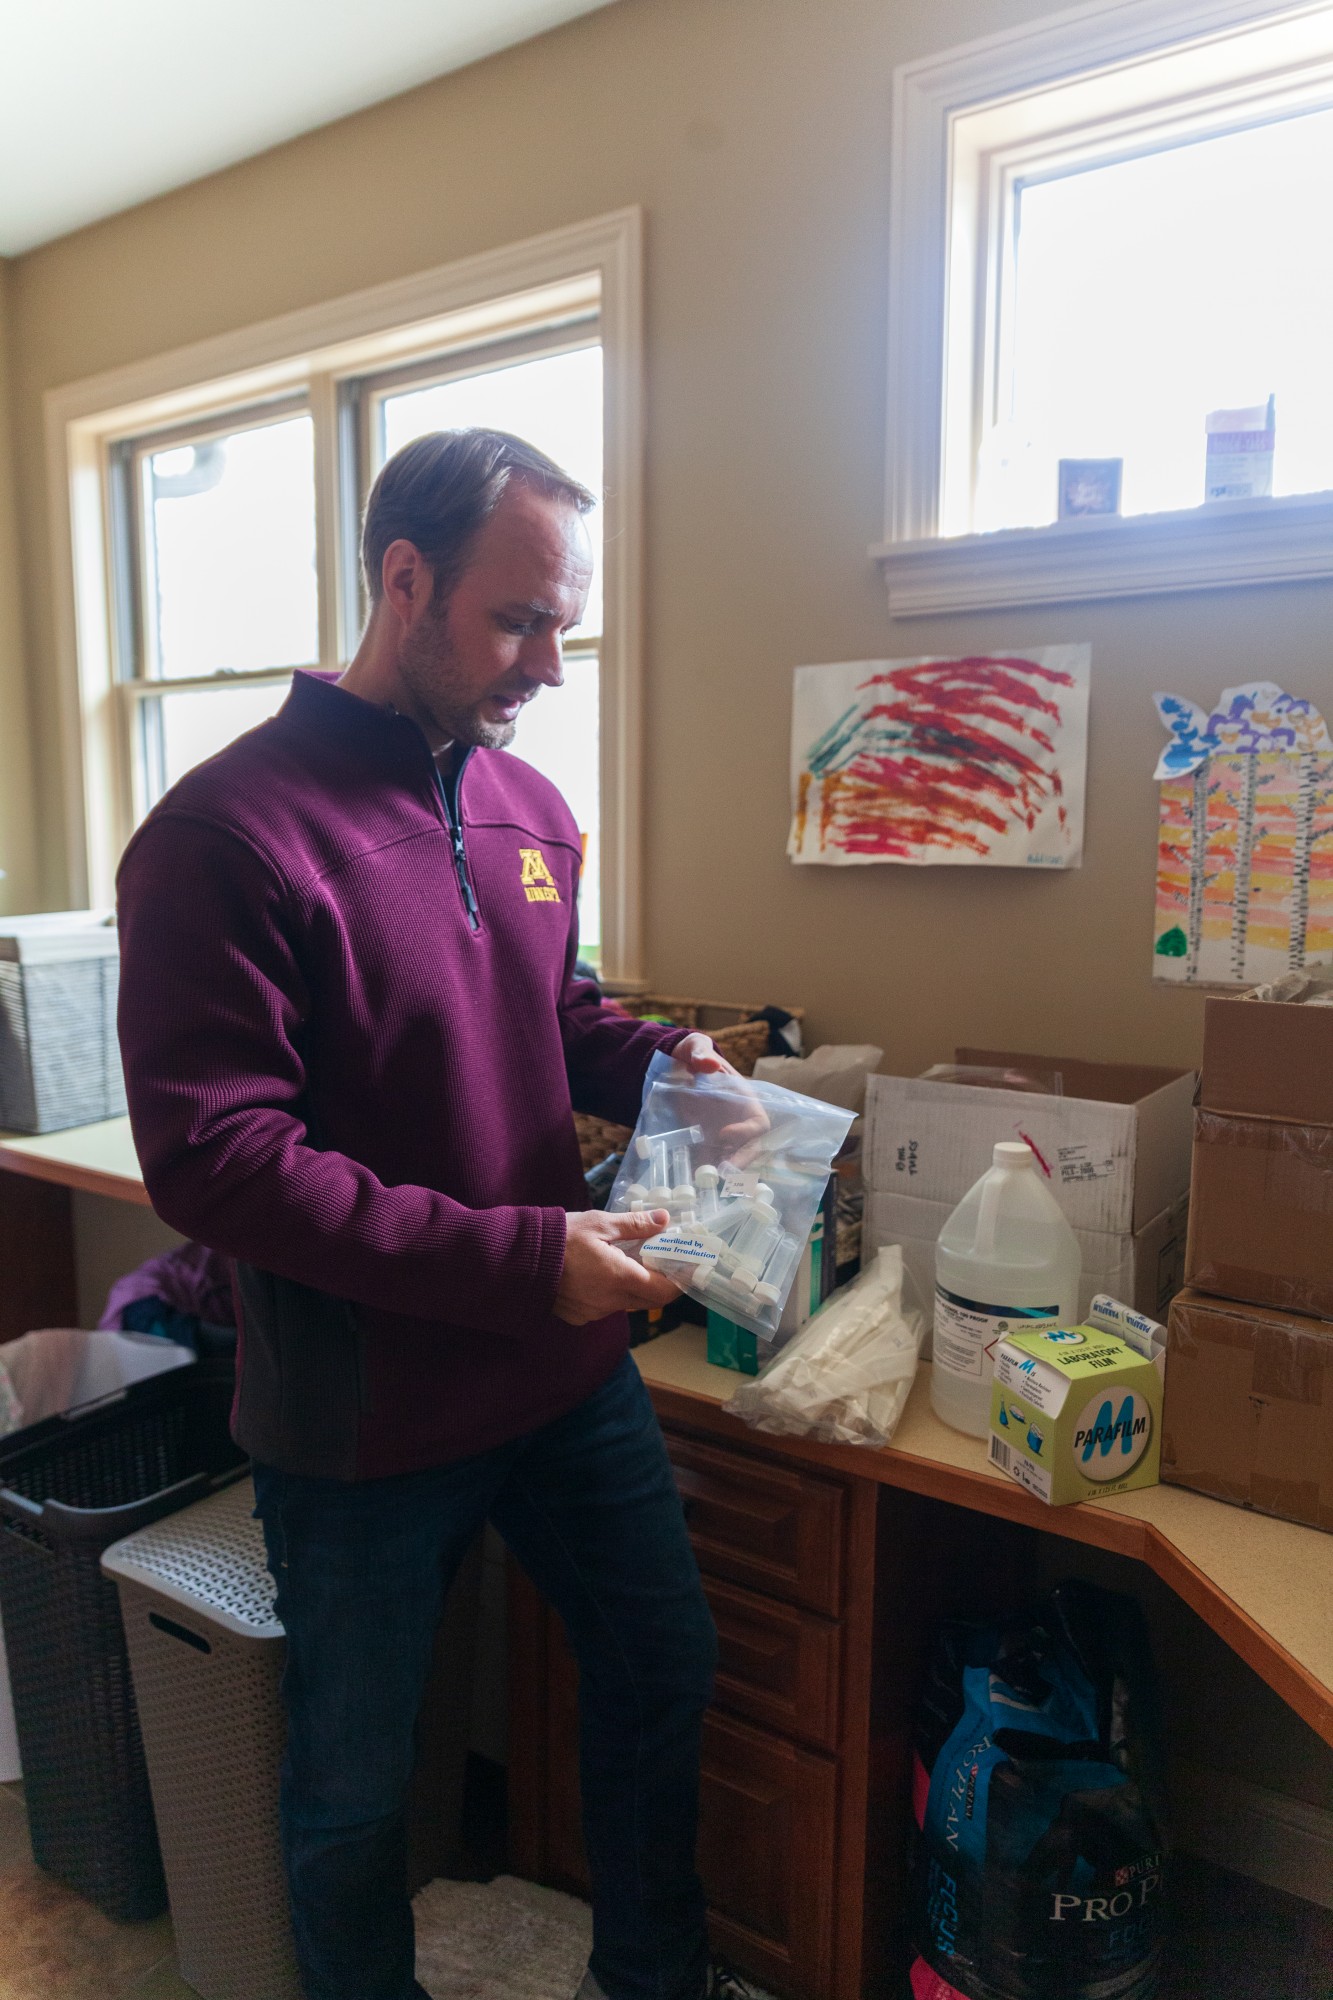 Associate Professor of Epidemiology Ryan Demmer, PhD., discusses the components of a testing kit for COVID-19 in his home on Friday, April 10.  The kit is being used to collect research data on the rate of asymptomatic infections among healthcare workers in the Twin Cities metro area.